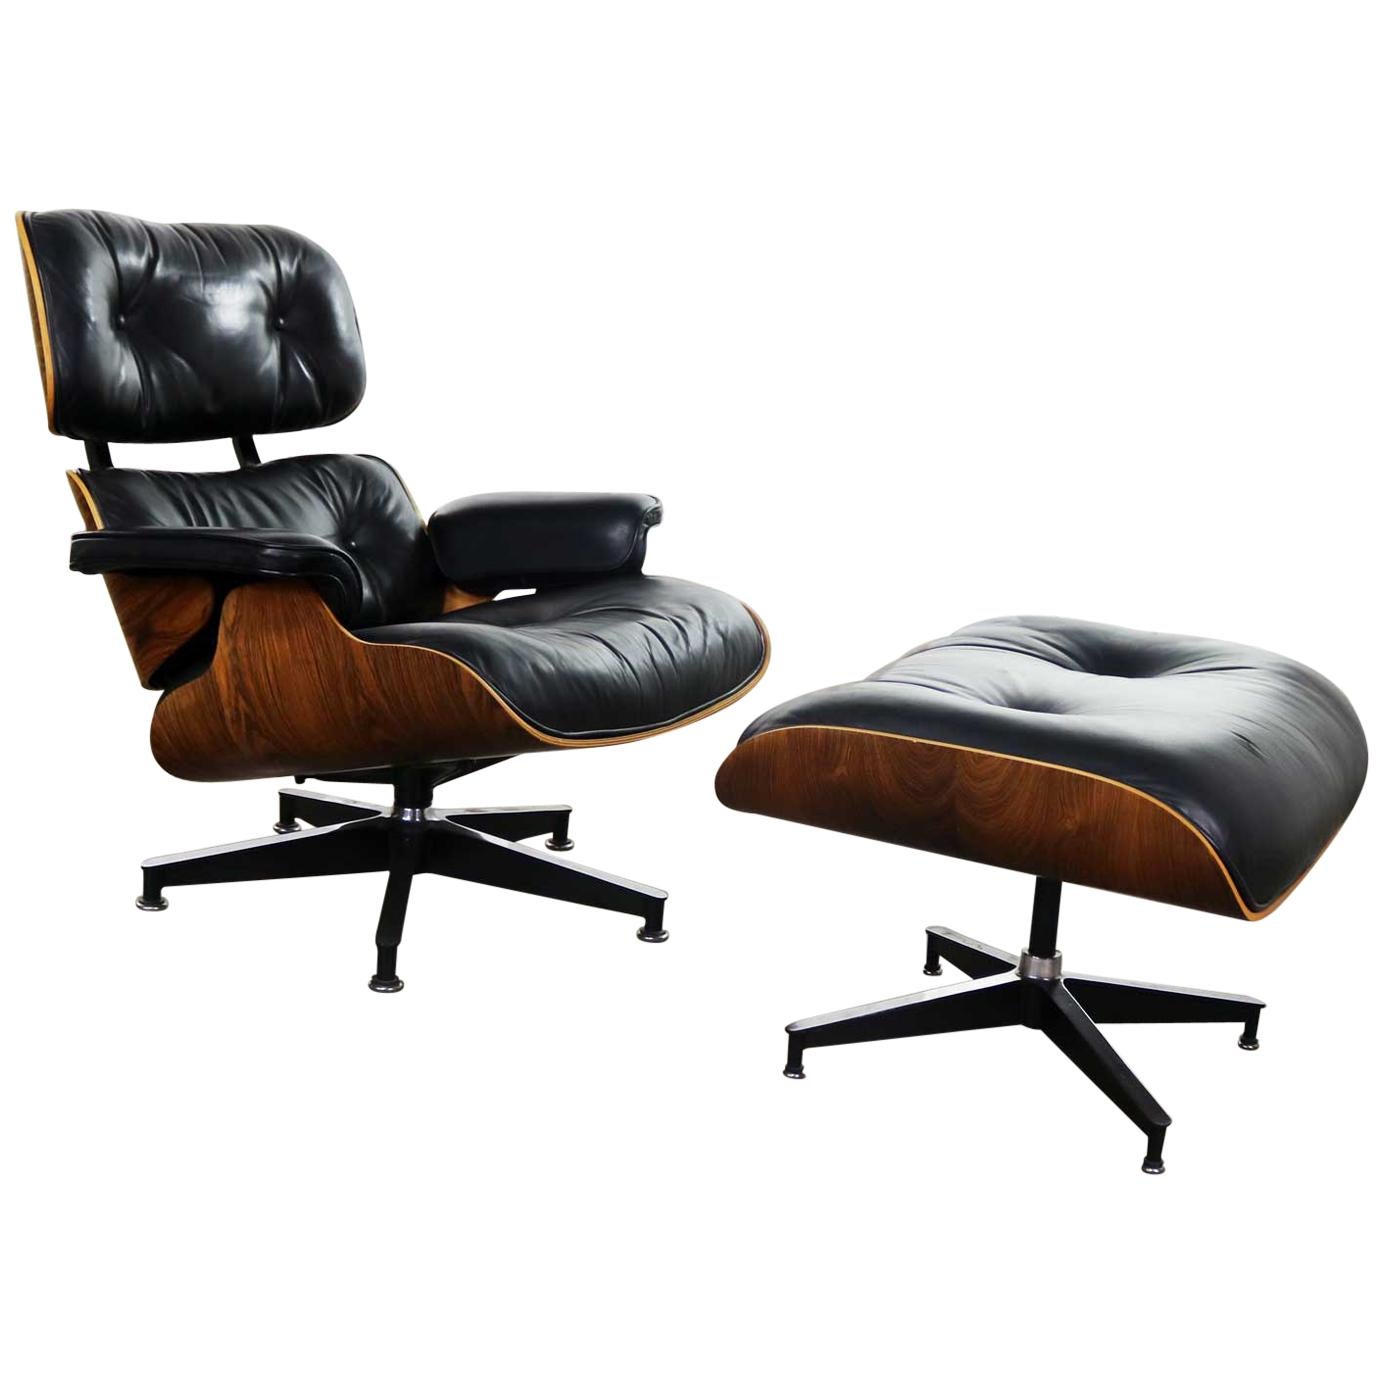 Vintage Eames Lounge Chair & Ottoman in Black Leather & Rosewood Herman Miller